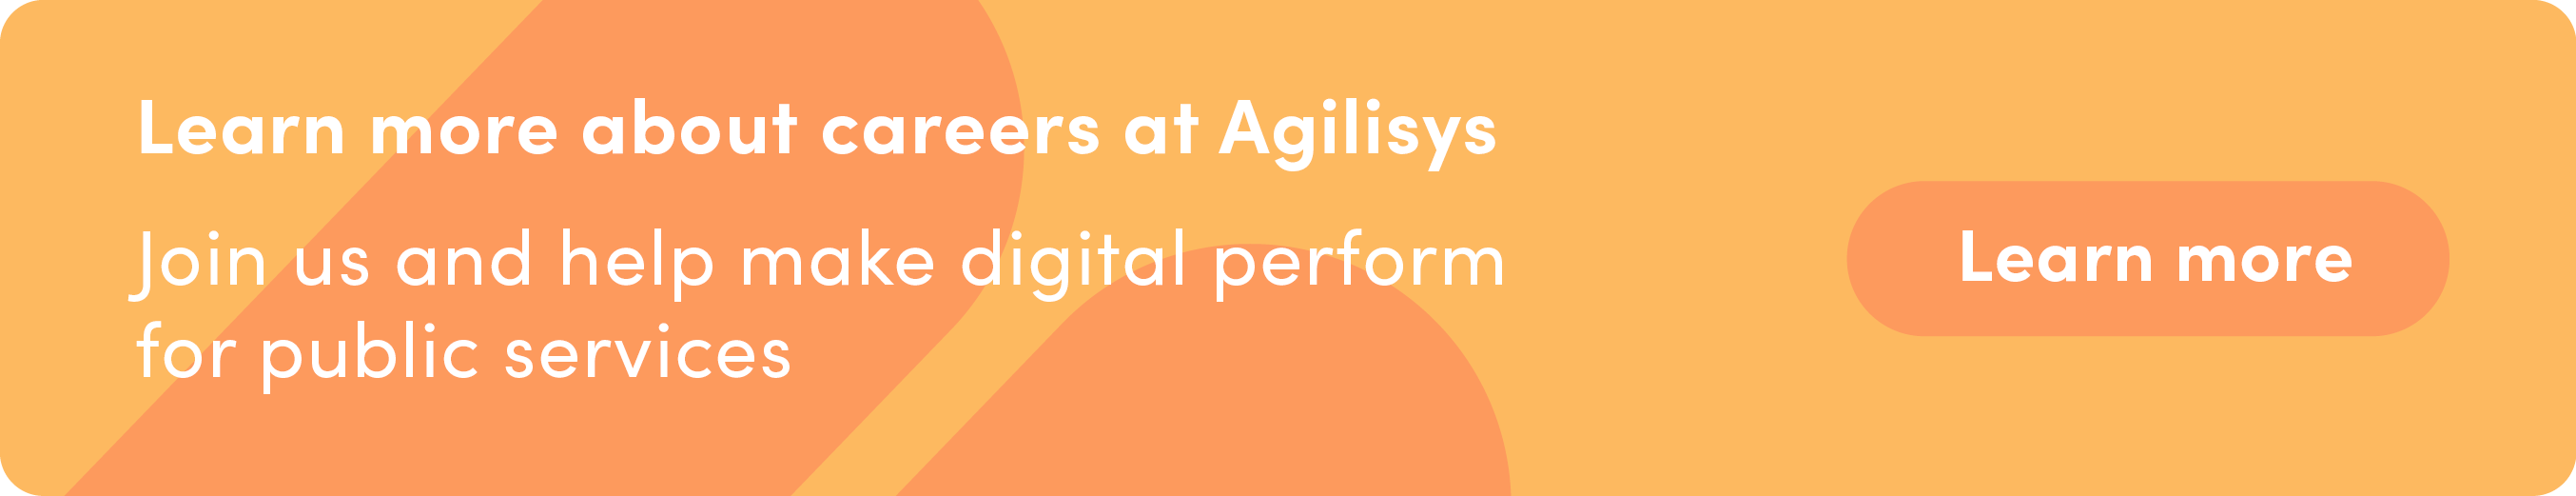 Learn more about careers at Agilisys